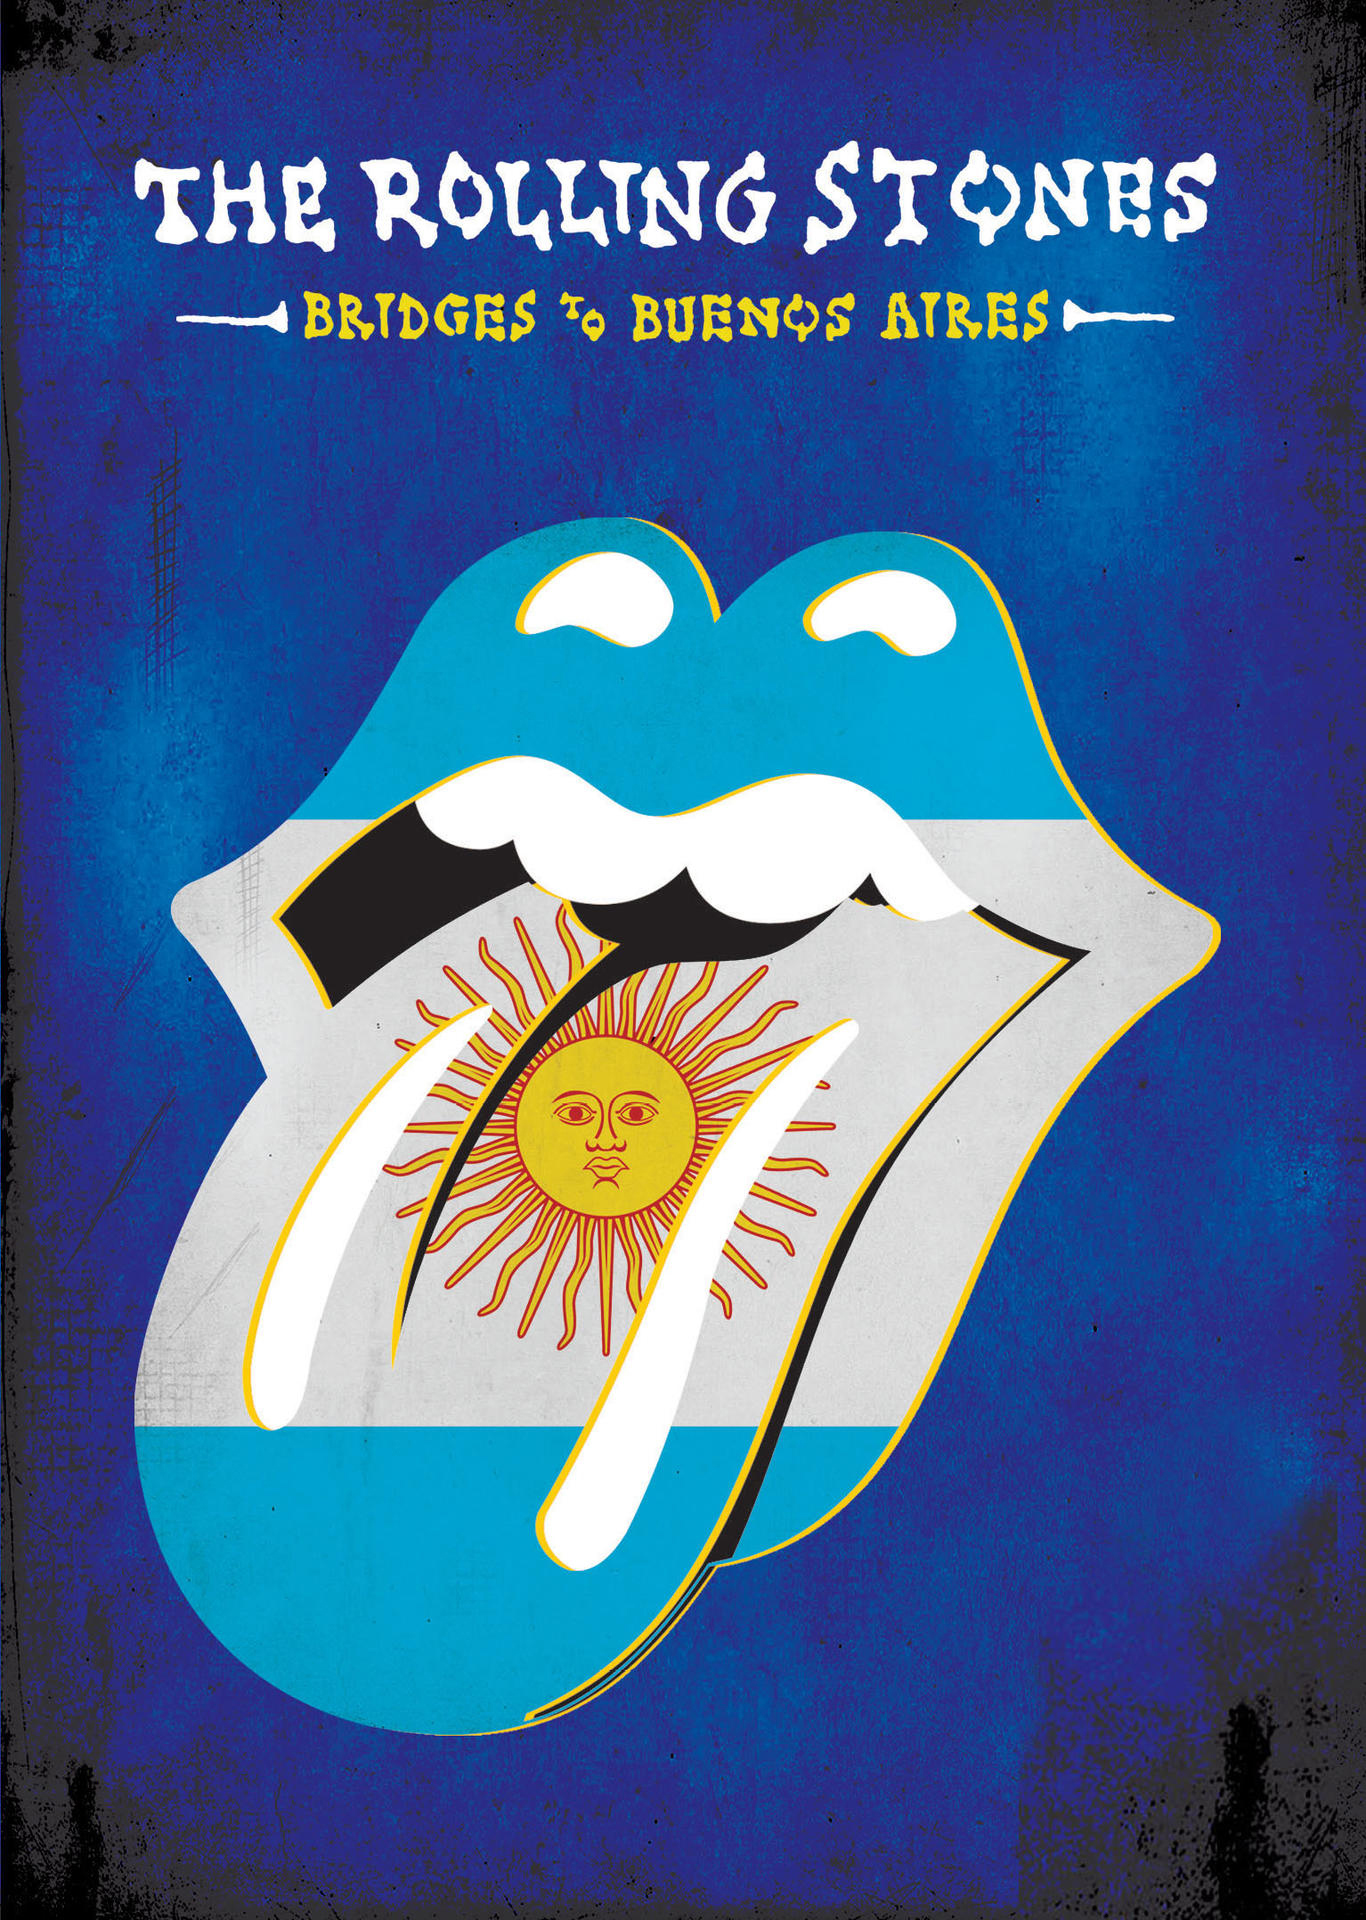 Buenos The Aires (CD Stones To Blu-ray + Rolling Disc) - - Bridges